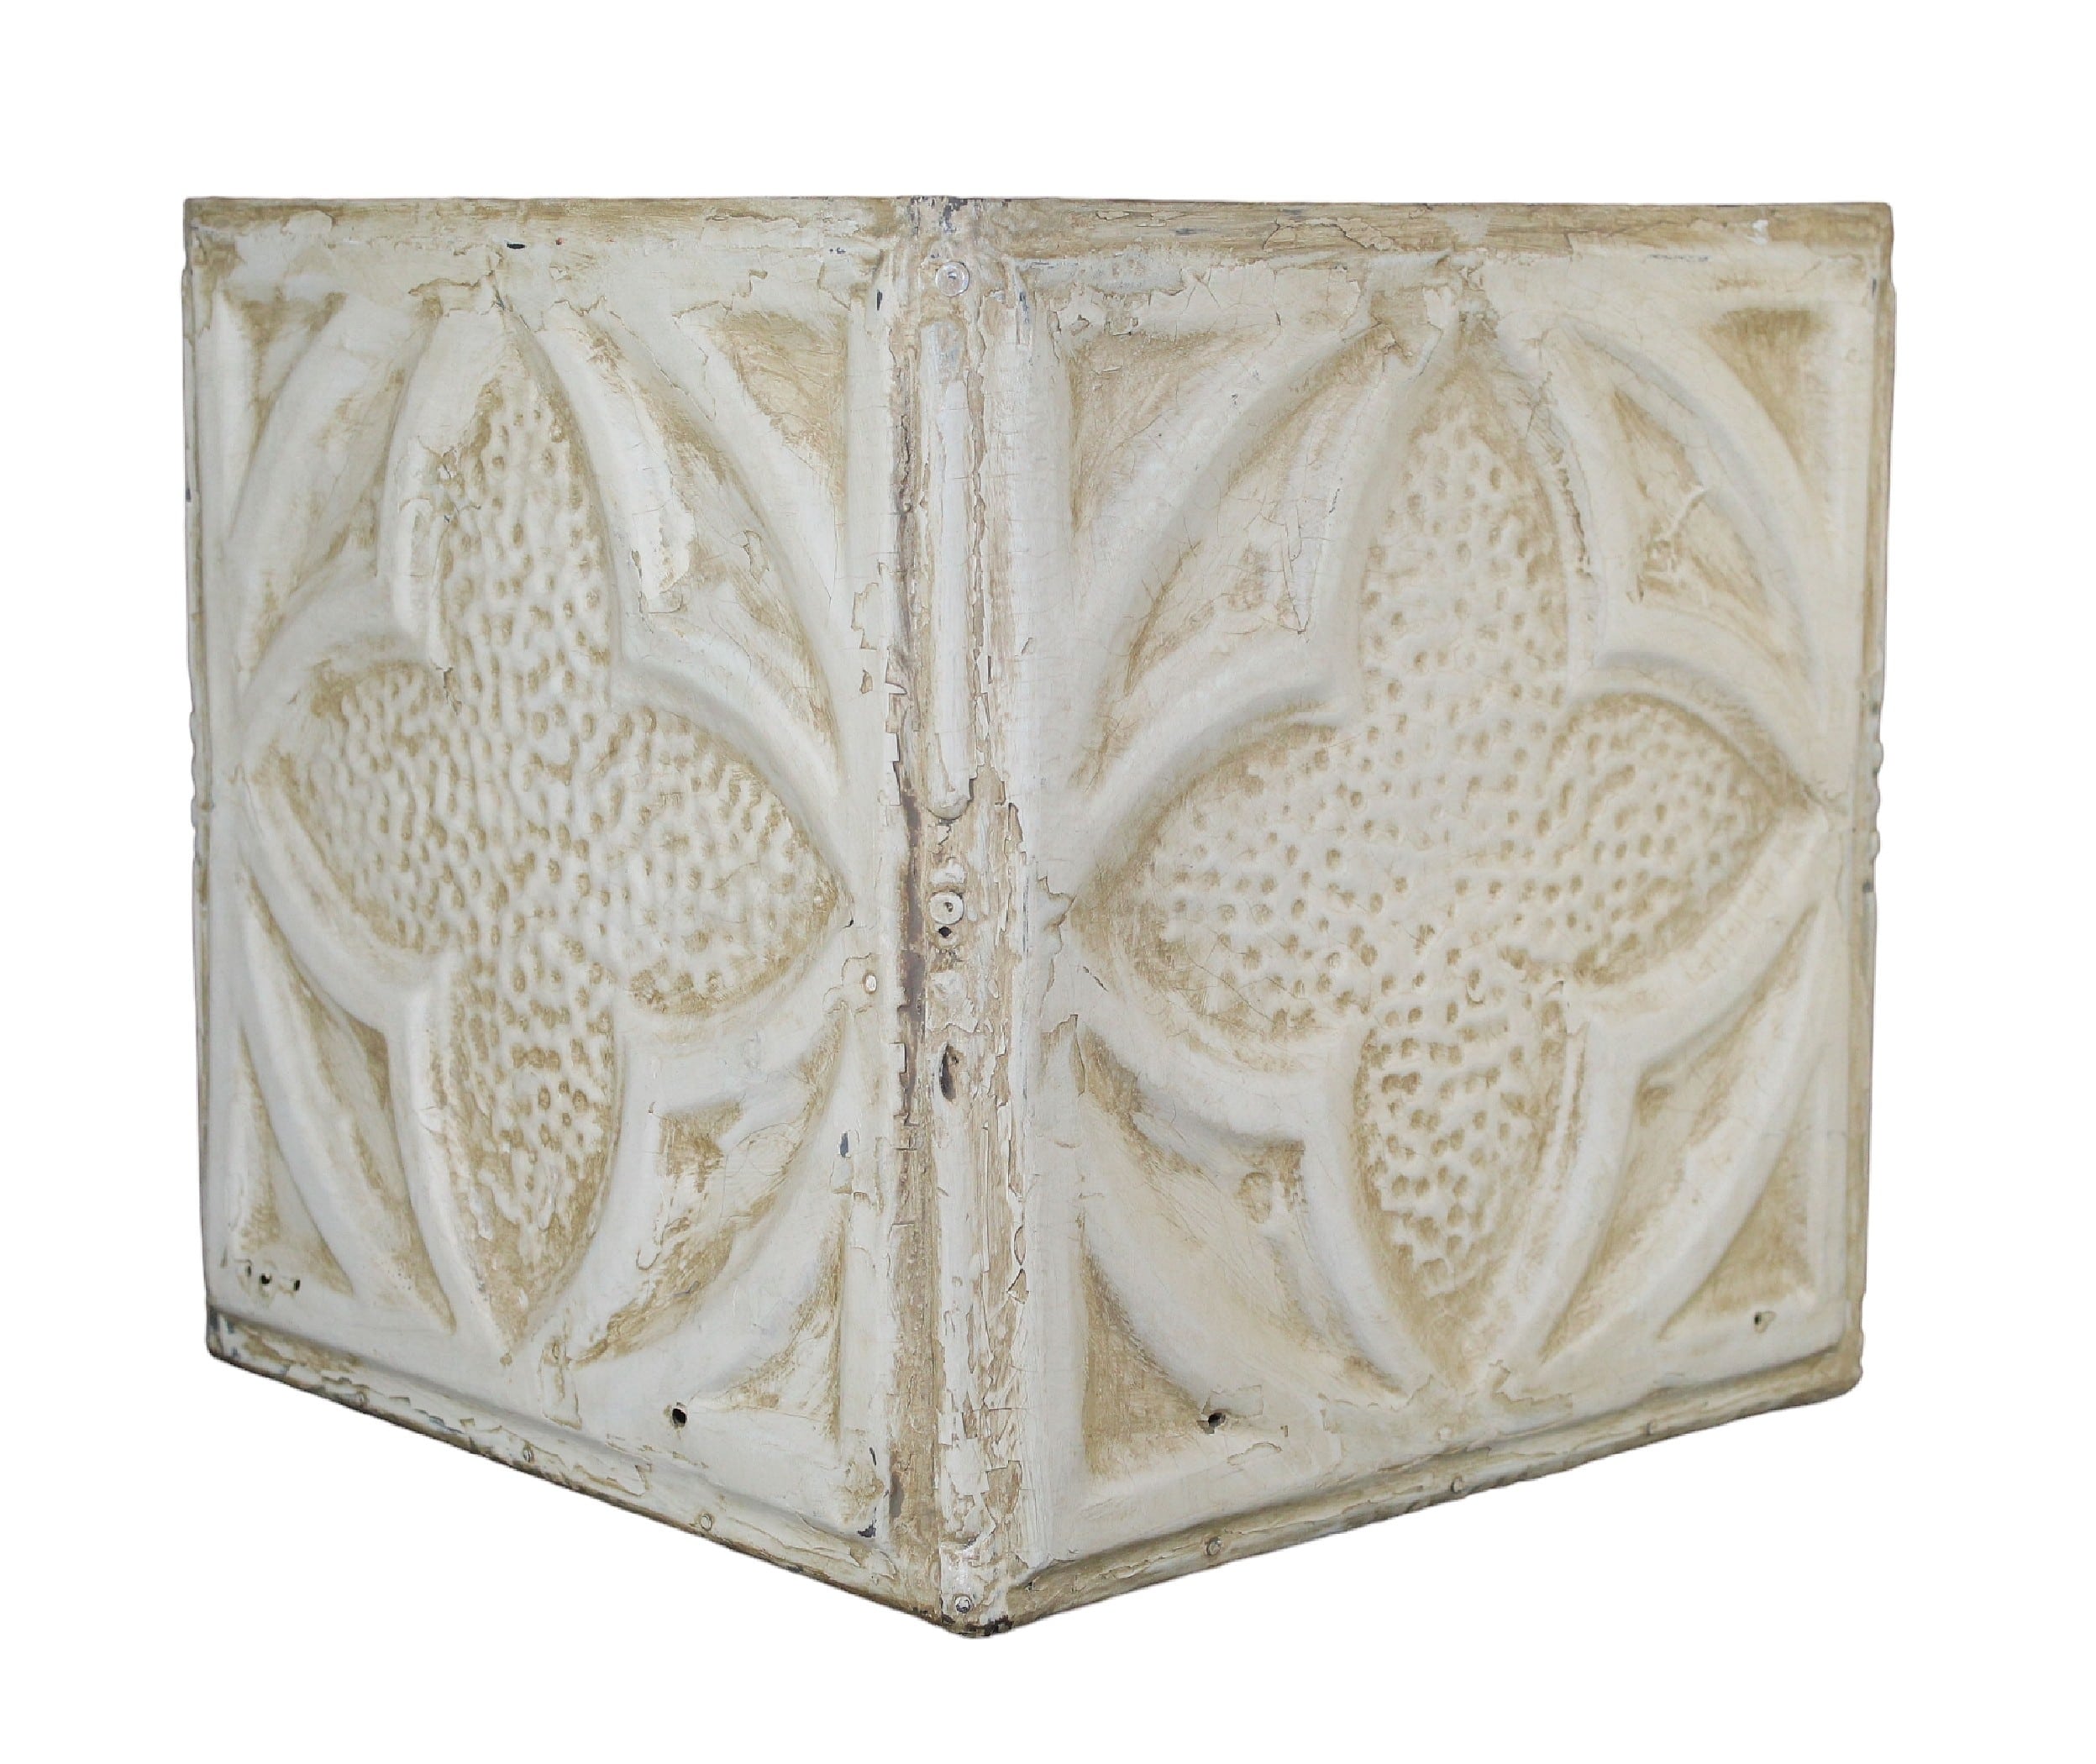 Painted and pressed tin square cachepot